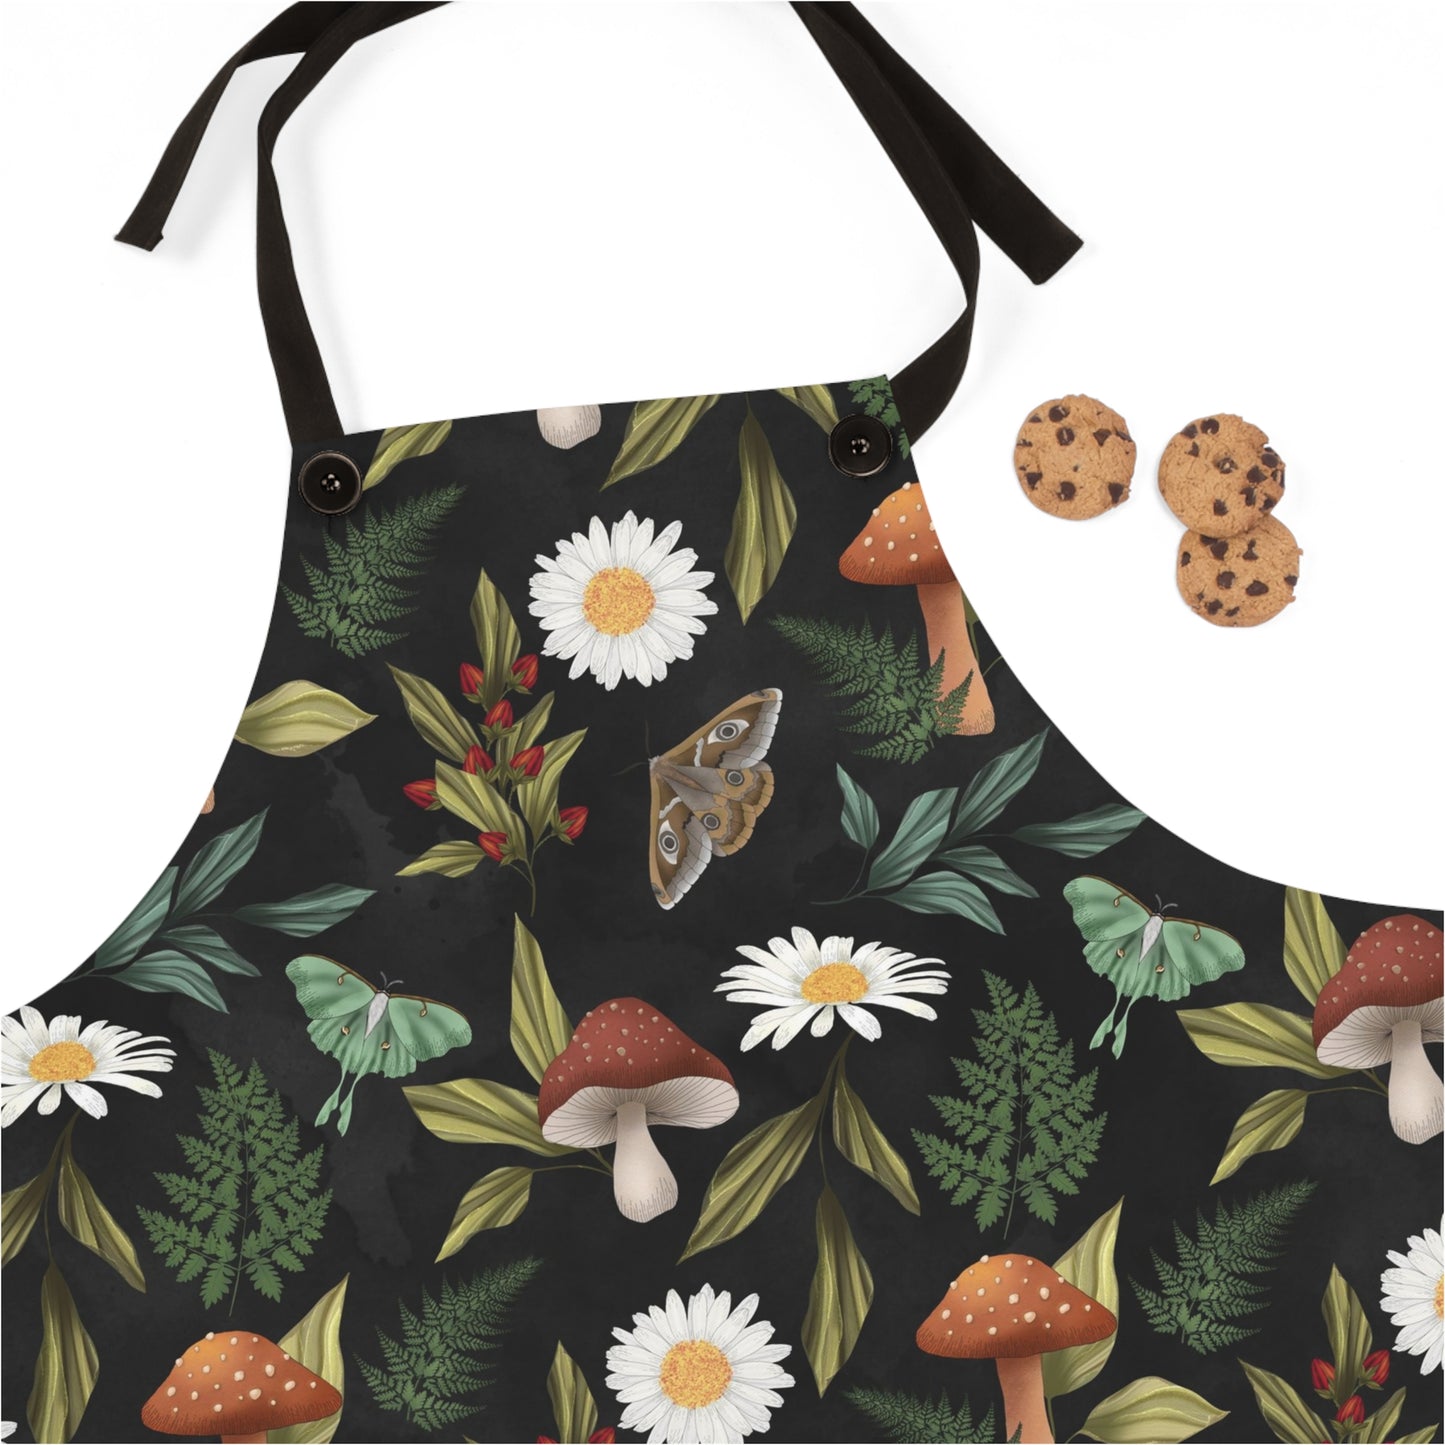 Kitchen Witch Apron - Featuring moths, mushrooms, botanicals, flowers & plants -  One Size - witchy gift, pagan gift, wiccan gift